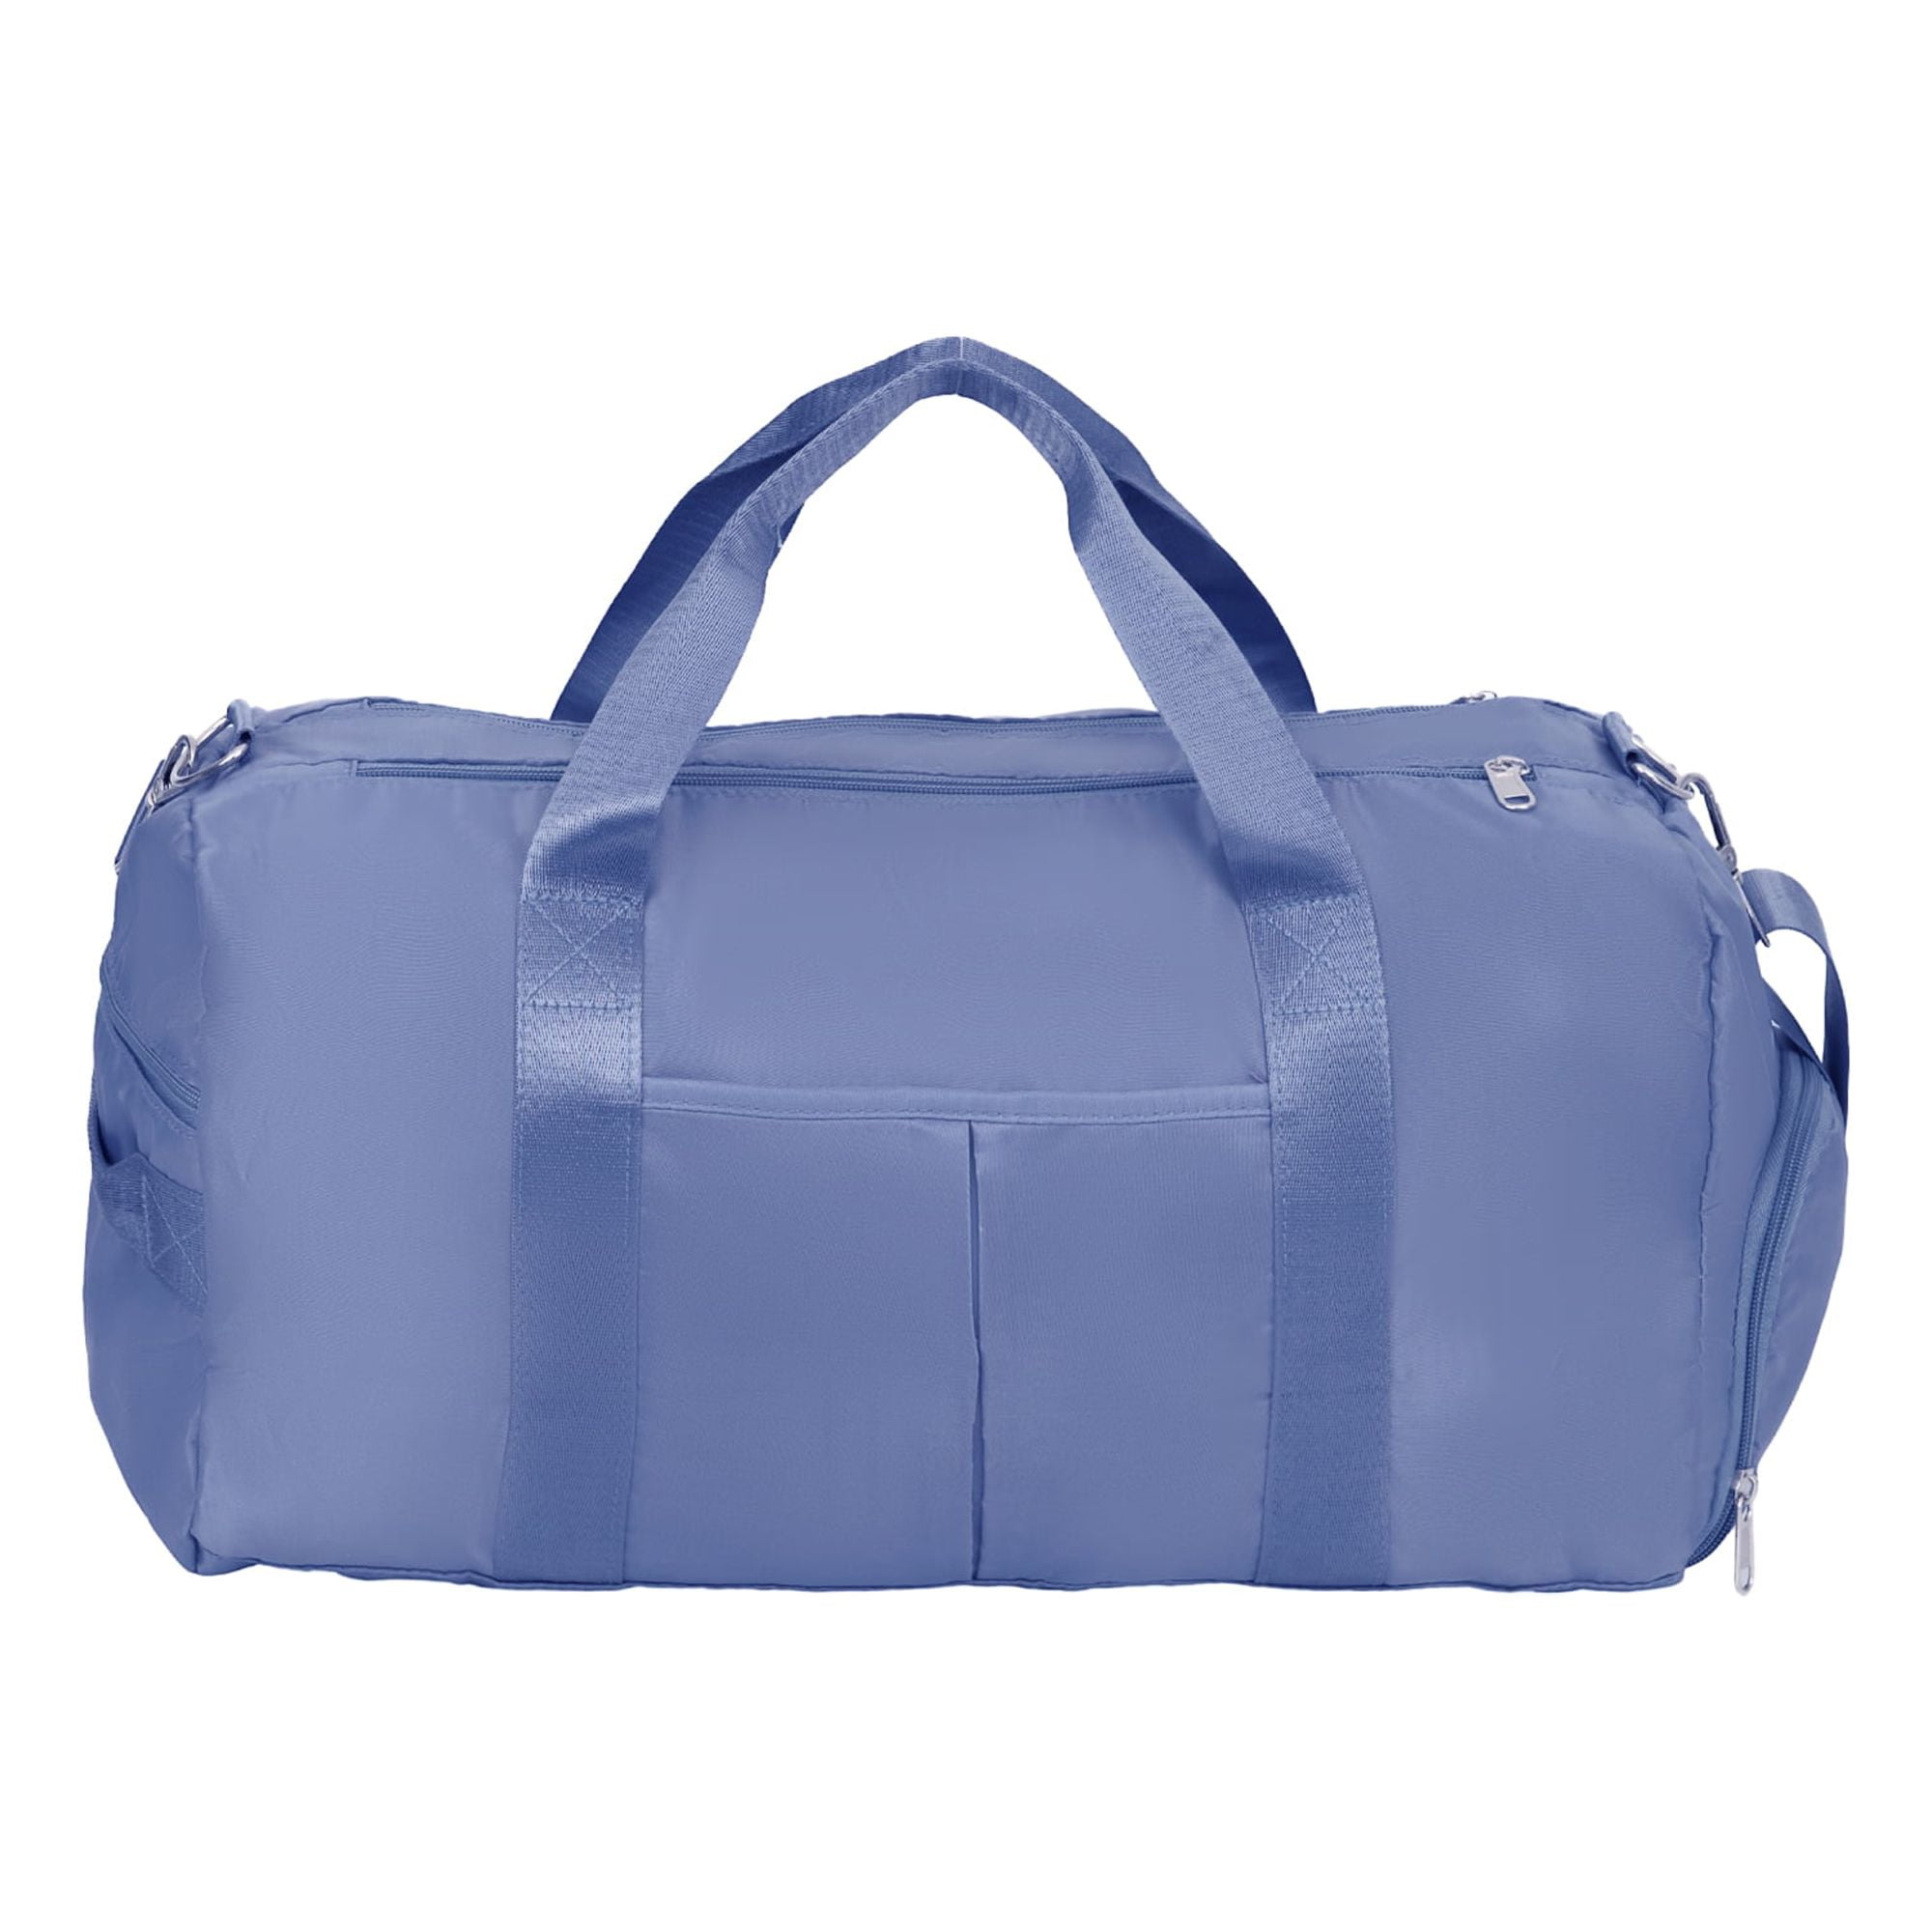 Travel Duffel Bag, Gym Bag with Shoes Compartment and Wet Pocket, Midsize  Bag for Women, Blue